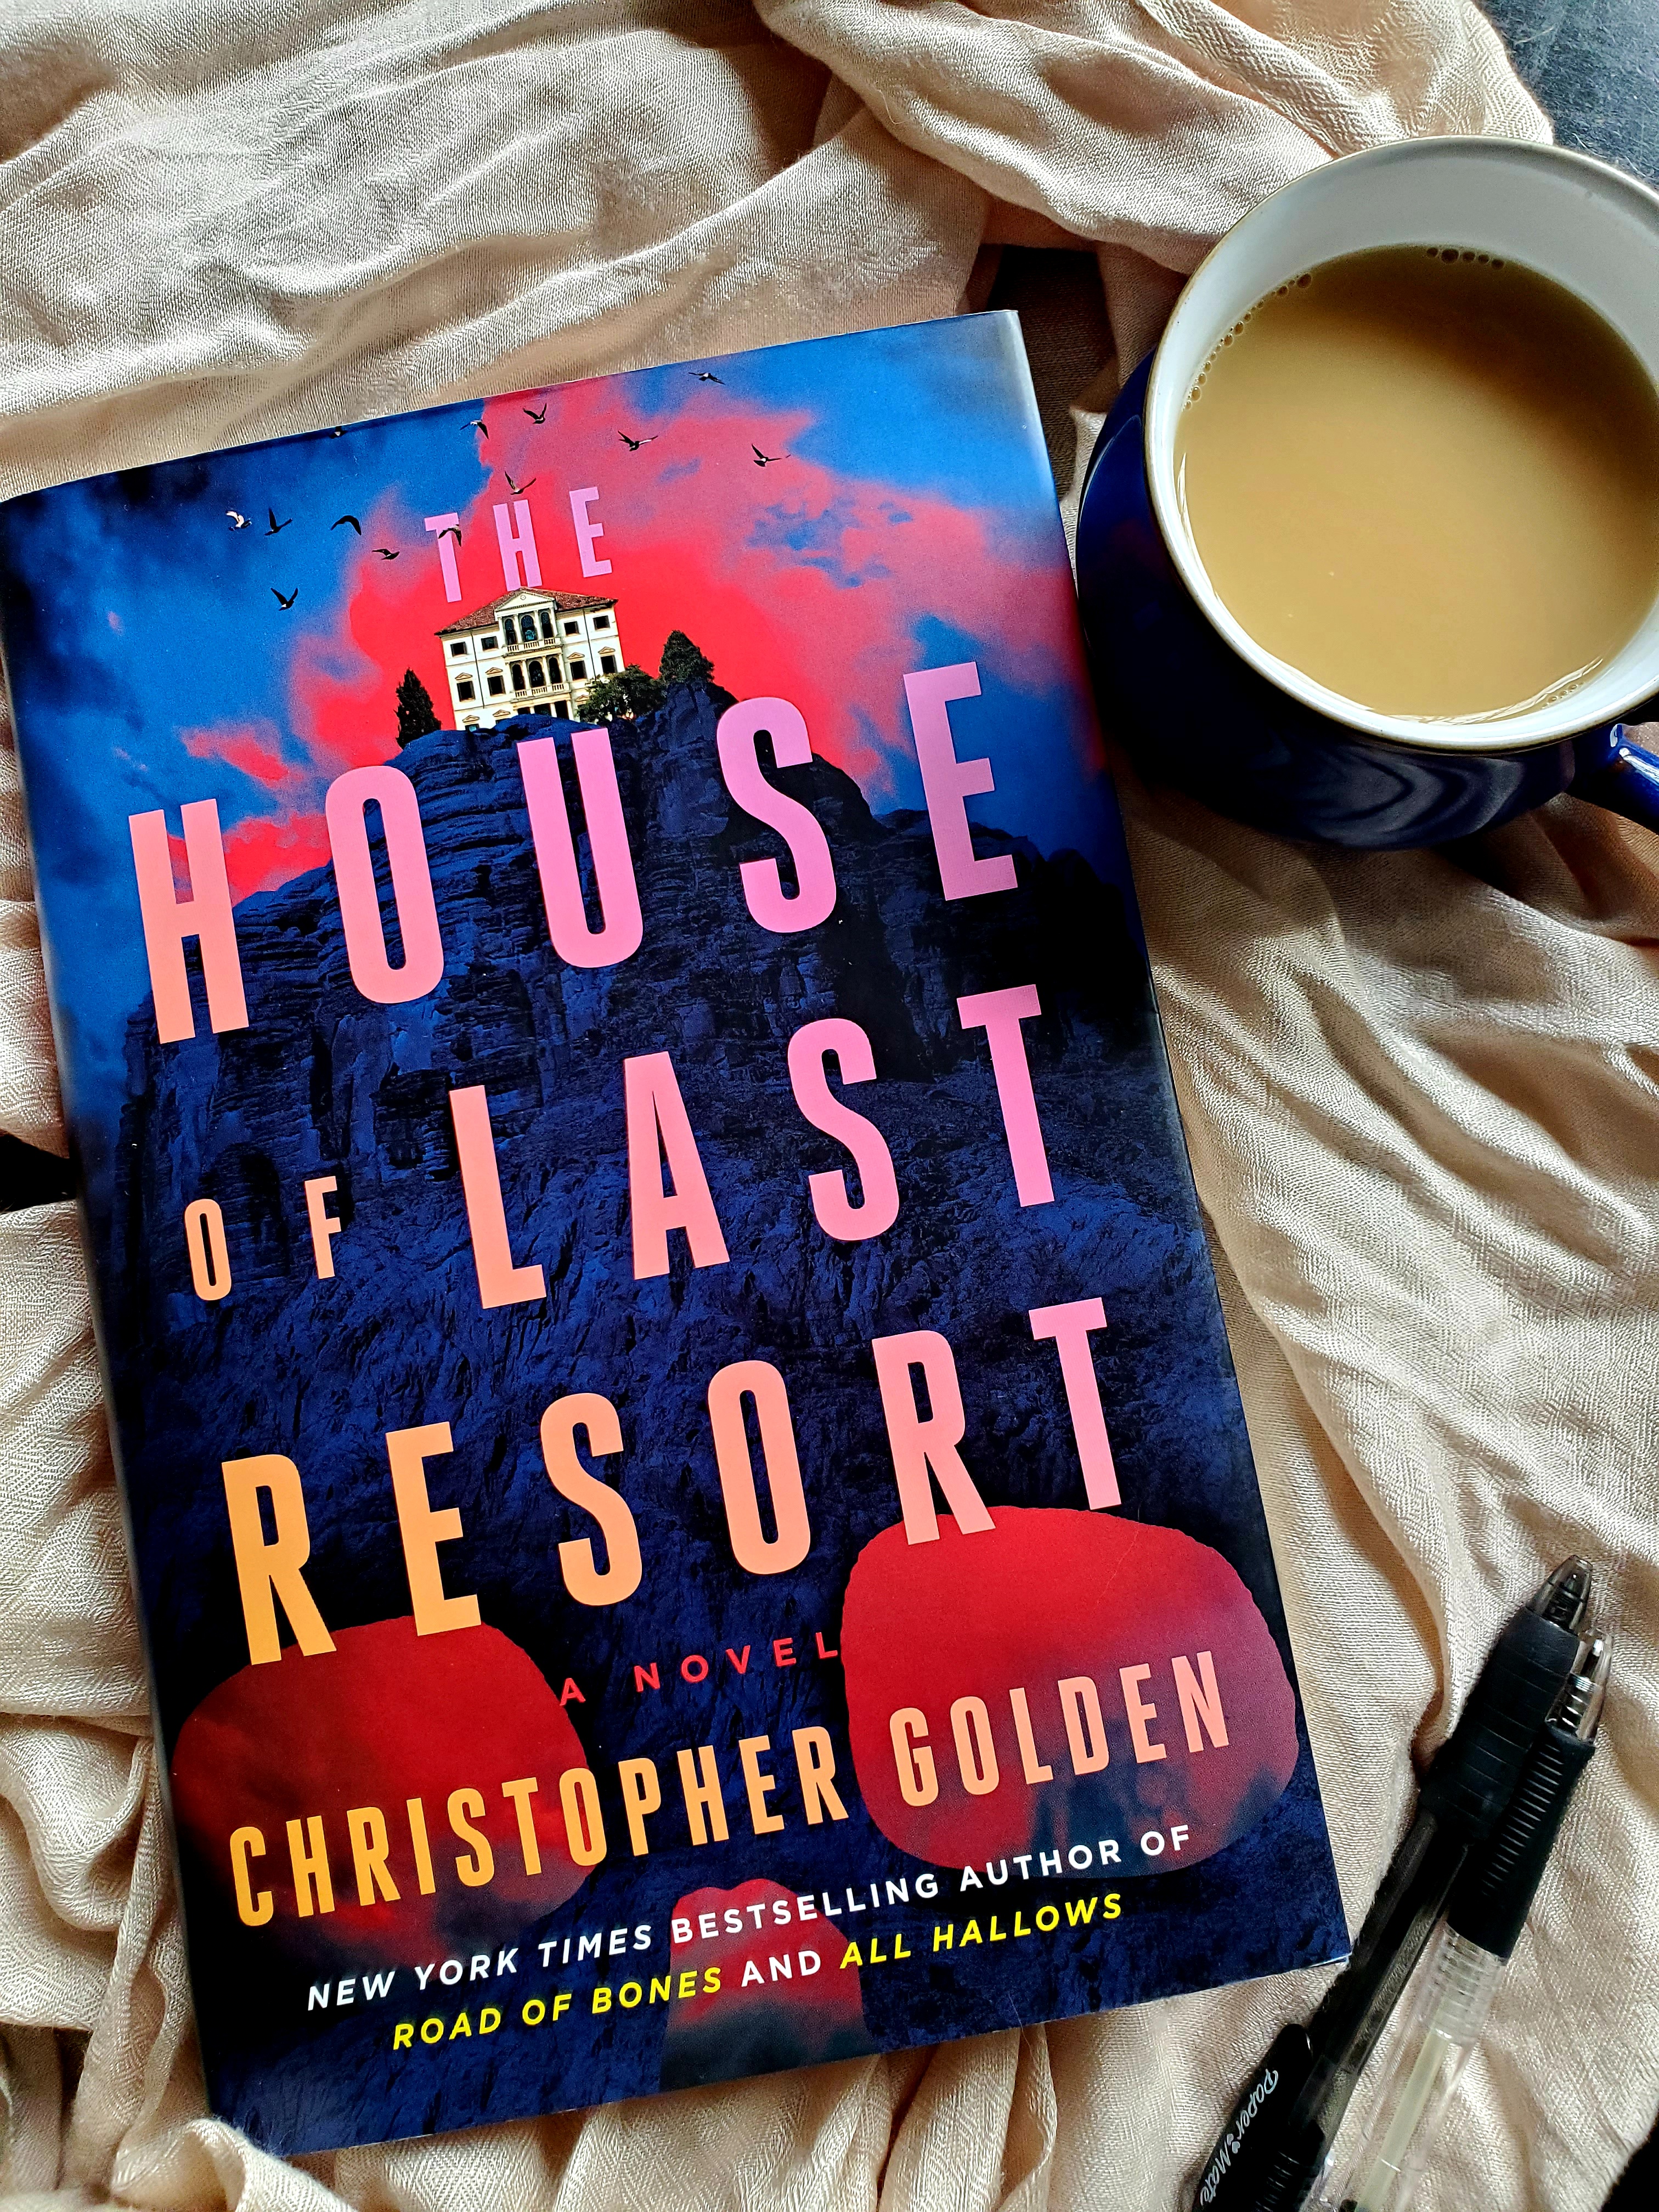 Podcast Book Club discussion of THE HOUSE OF LAST RESORT